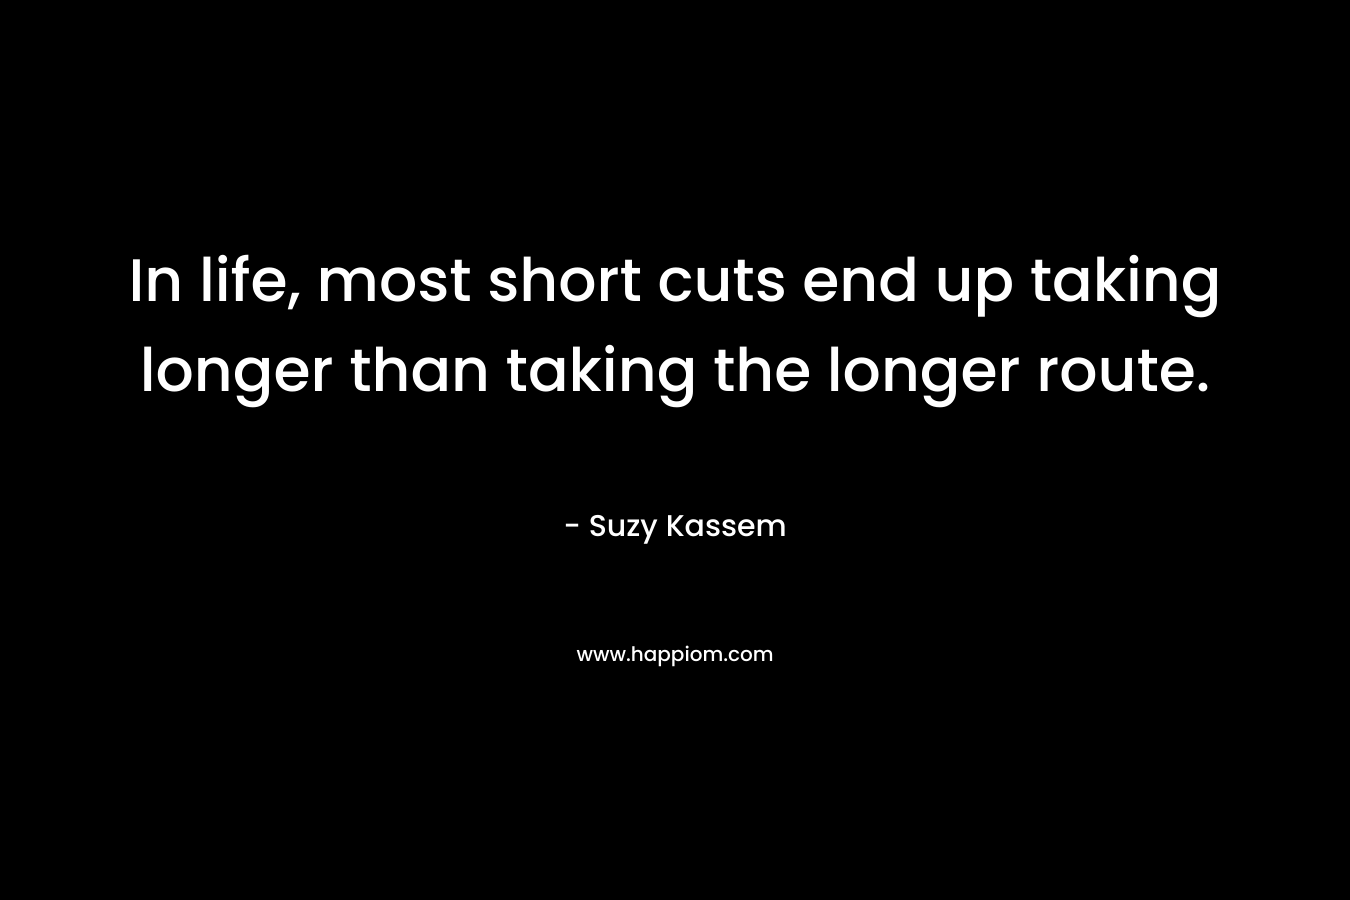 In life, most short cuts end up taking longer than taking the longer route.